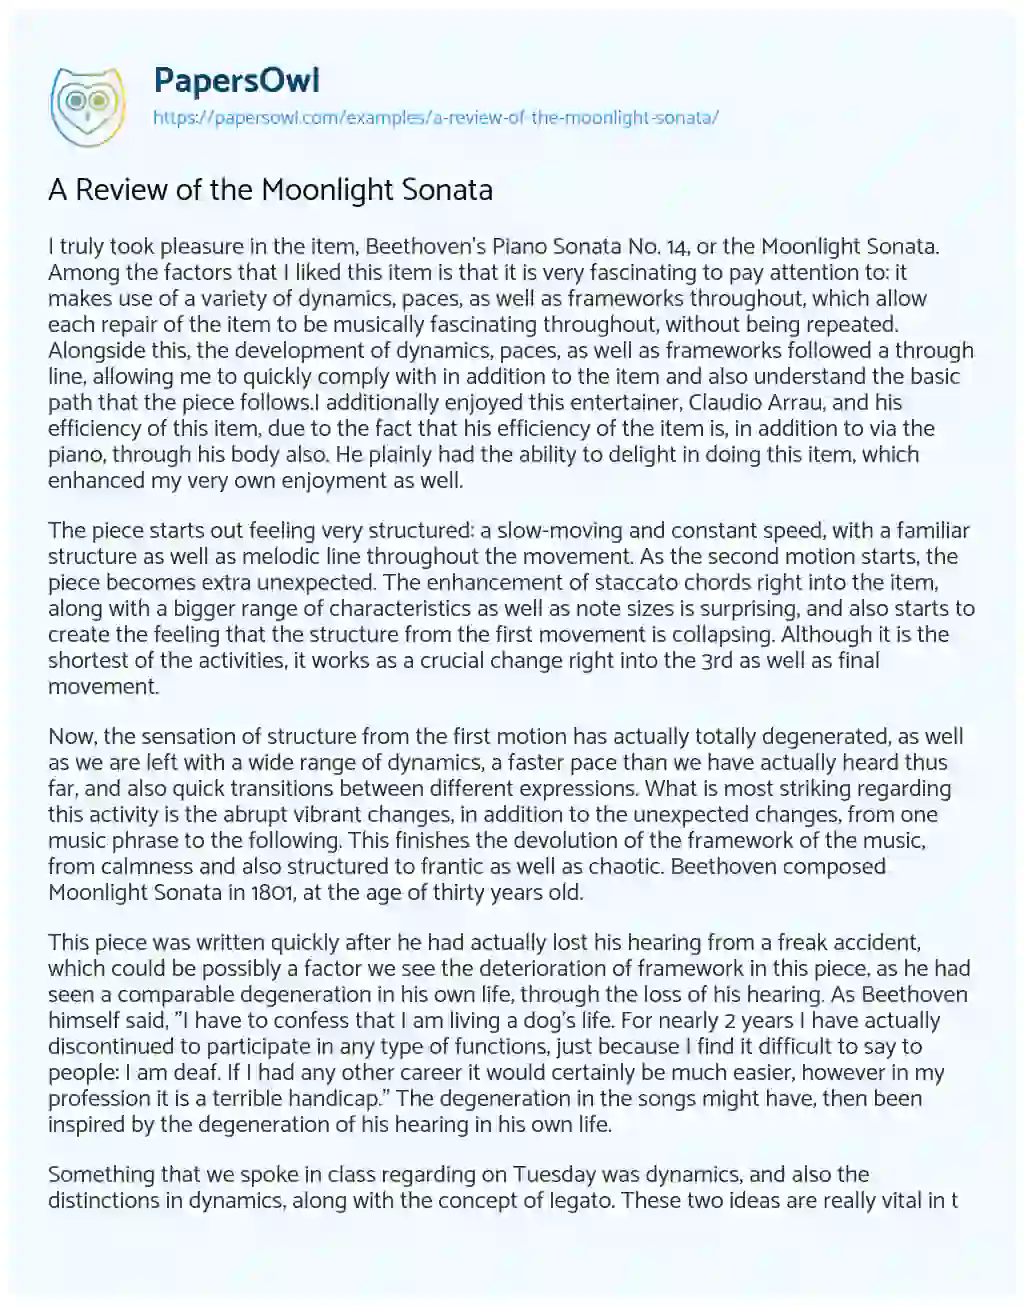 Essay on A Review of the Moonlight Sonata